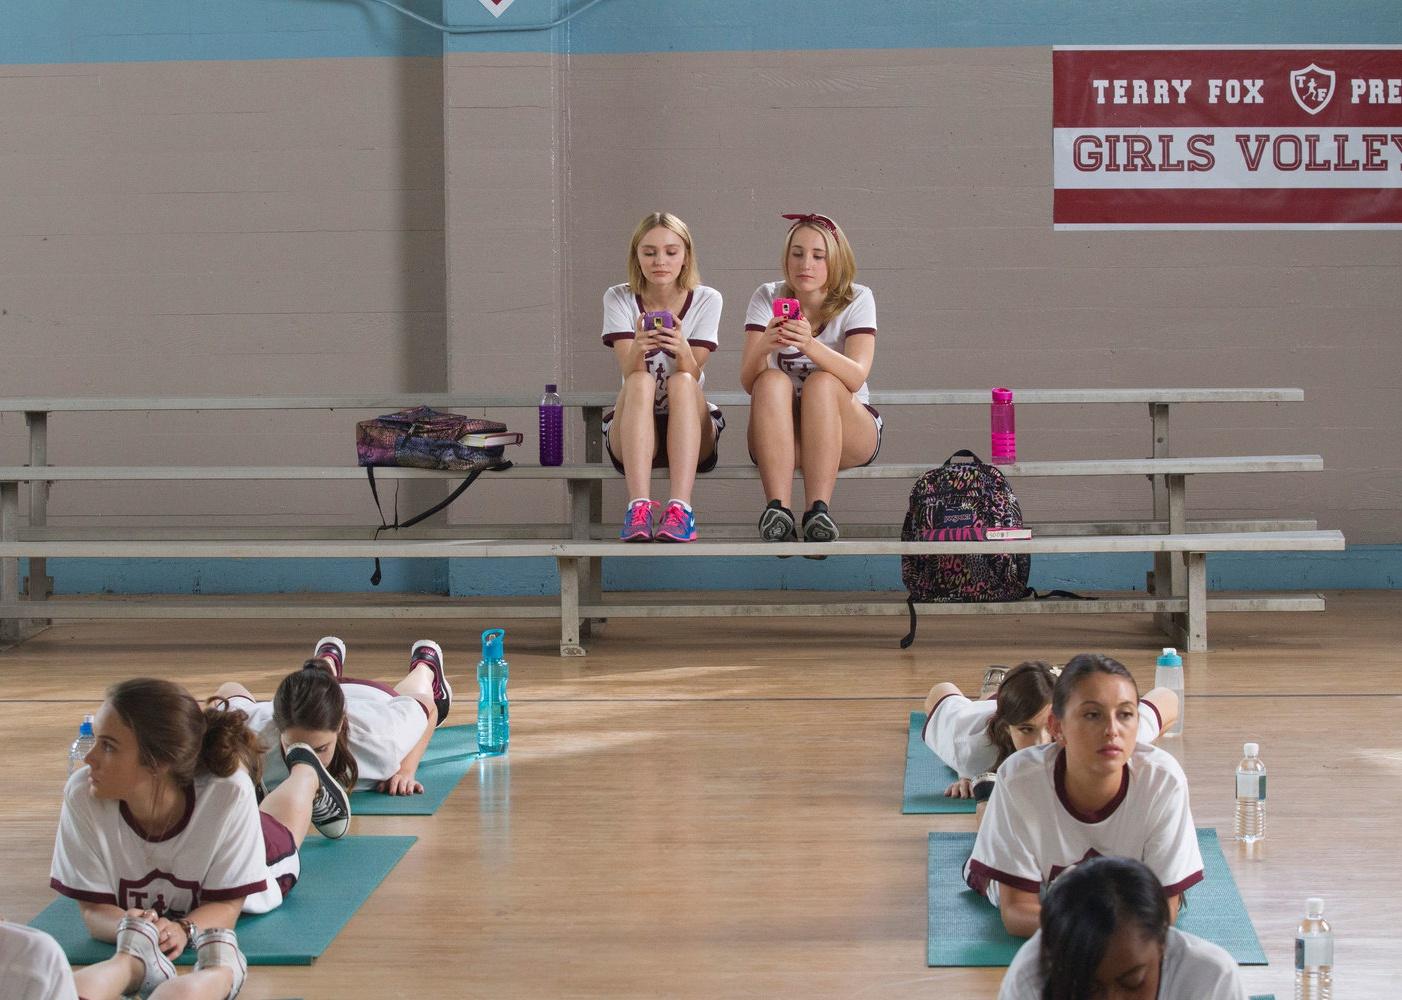 Harley Quinn Smith and Lily-Rose Depp sitting on bleachers looking at their phones while girls do yoga in a gym.